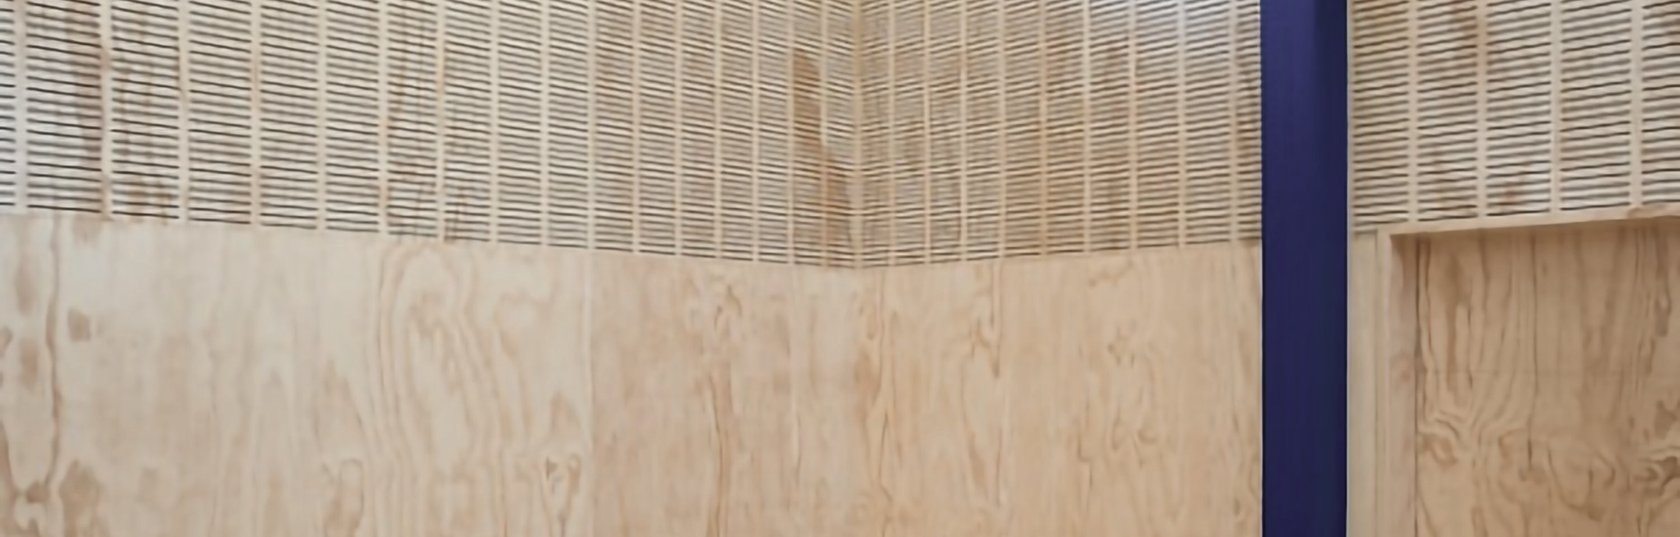 Plywood: A Sustainable Material with a Natural Look